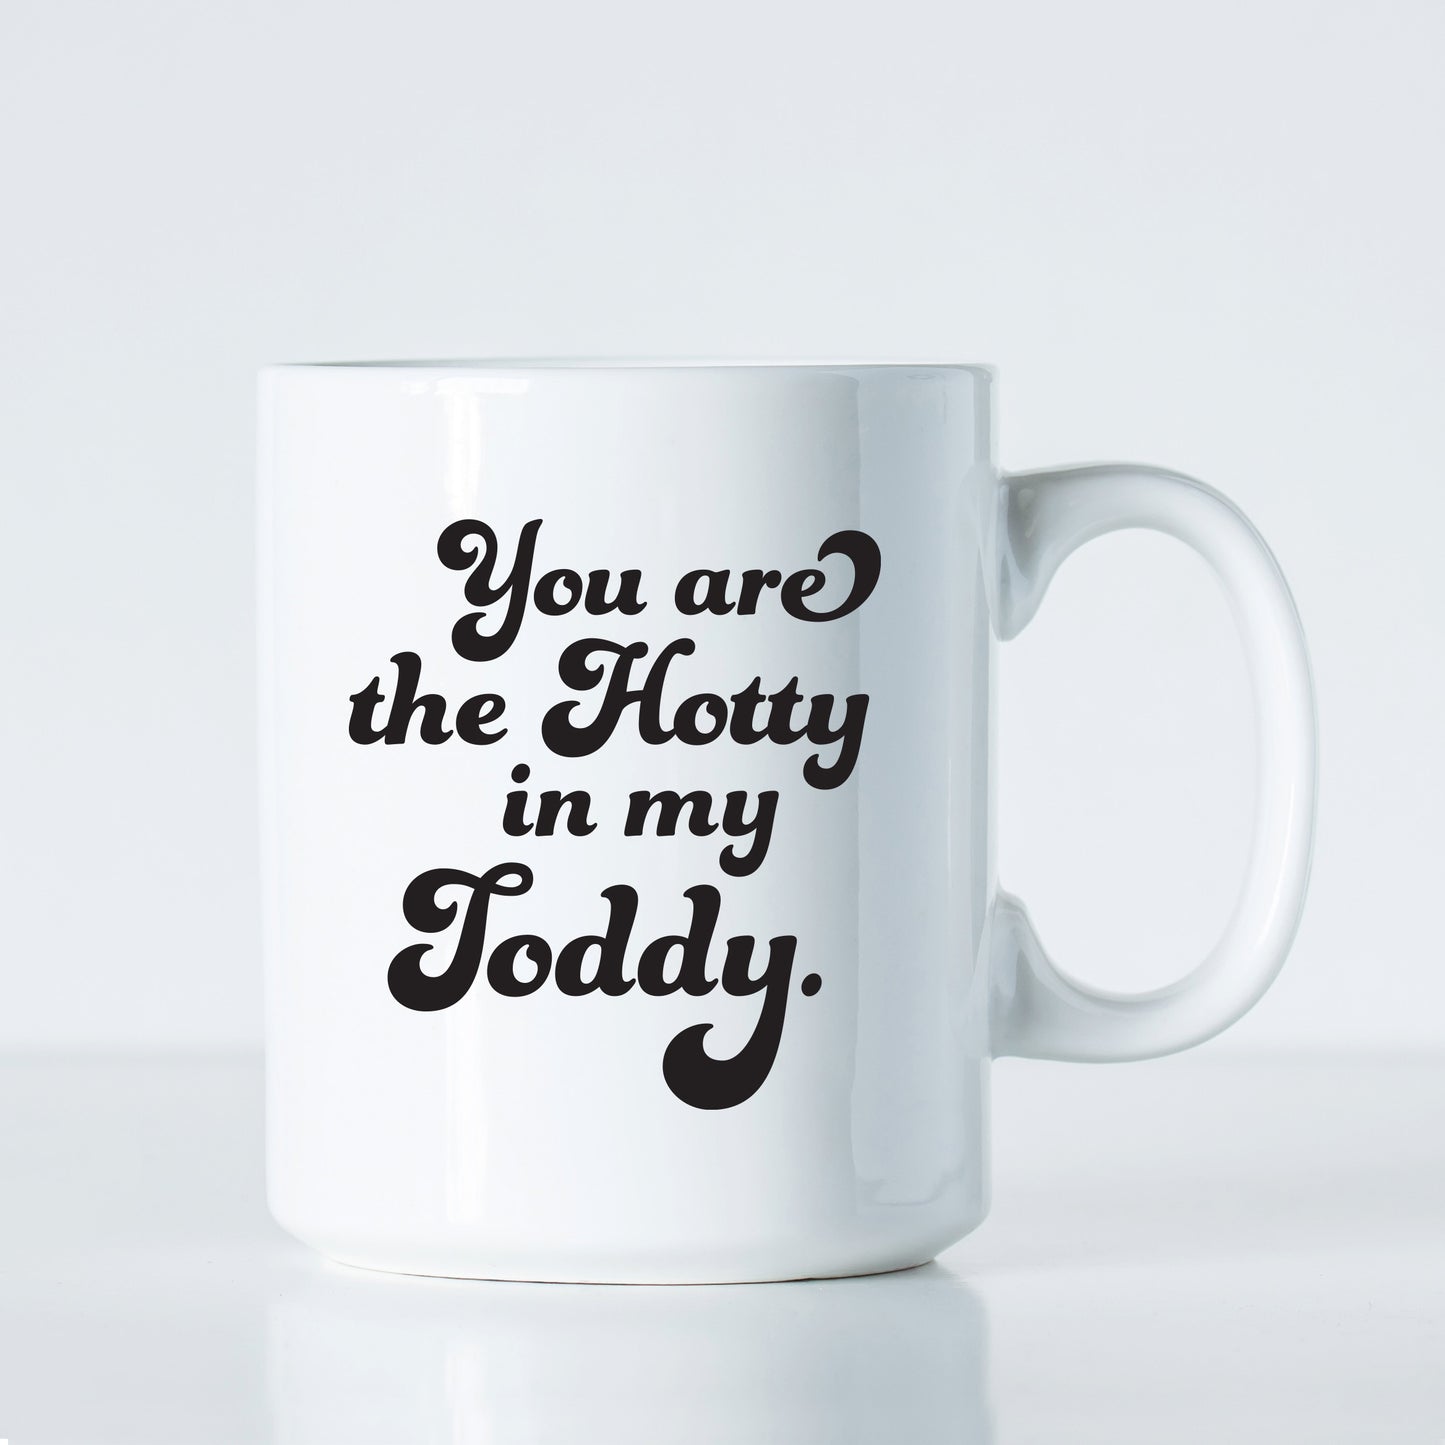 Batch "You Are the Hotty in My Totty" Mug